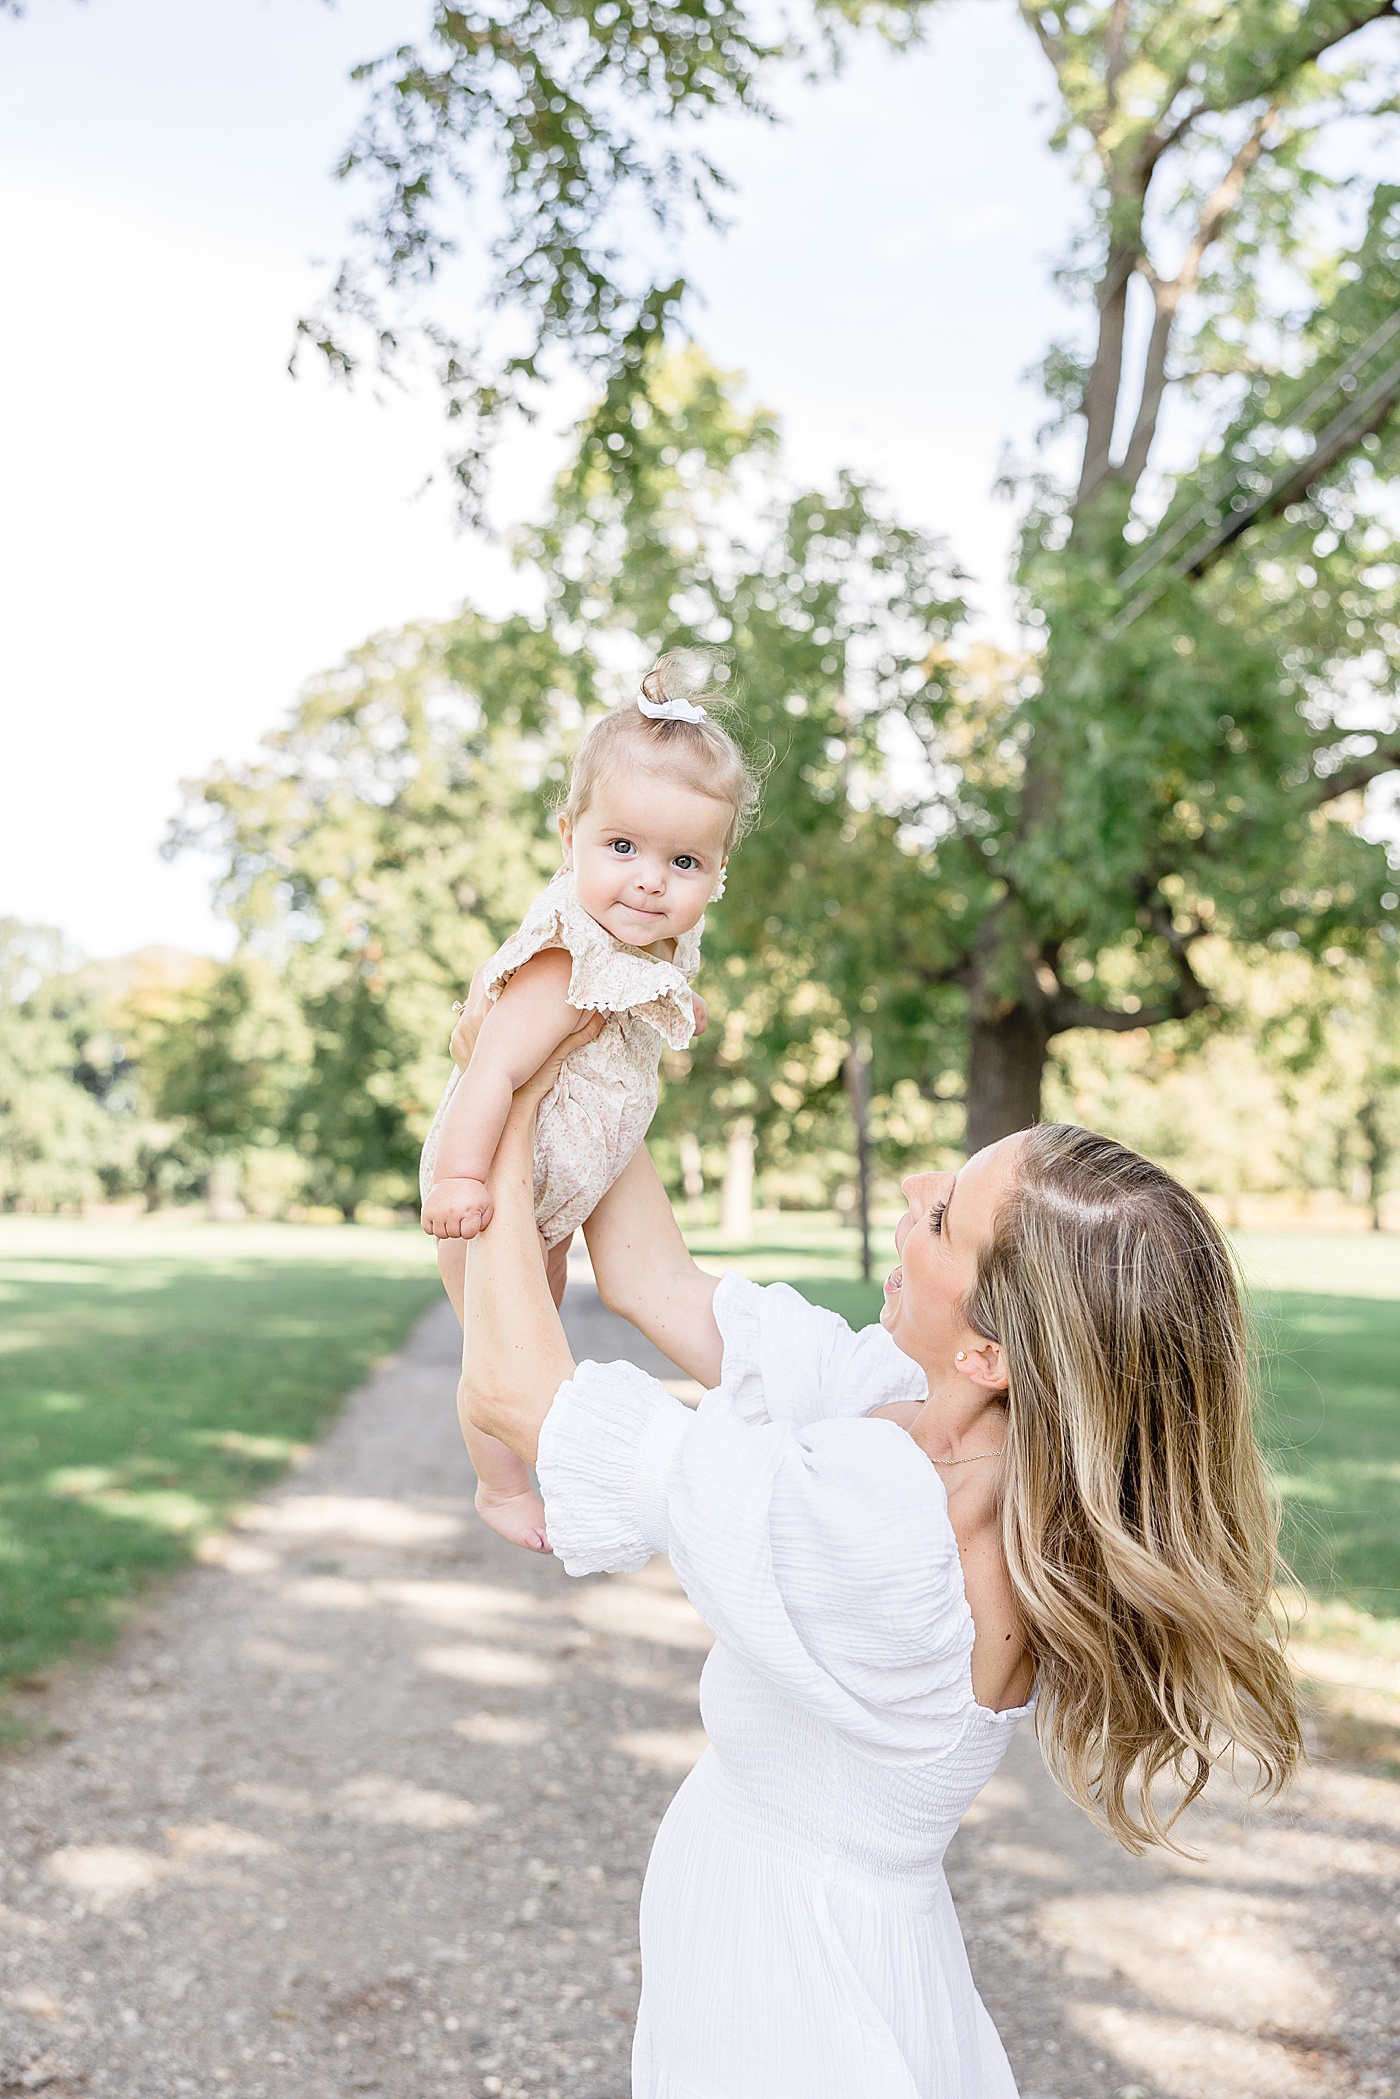 Mom holding baby girl up in the air | Kristin Wood Photography